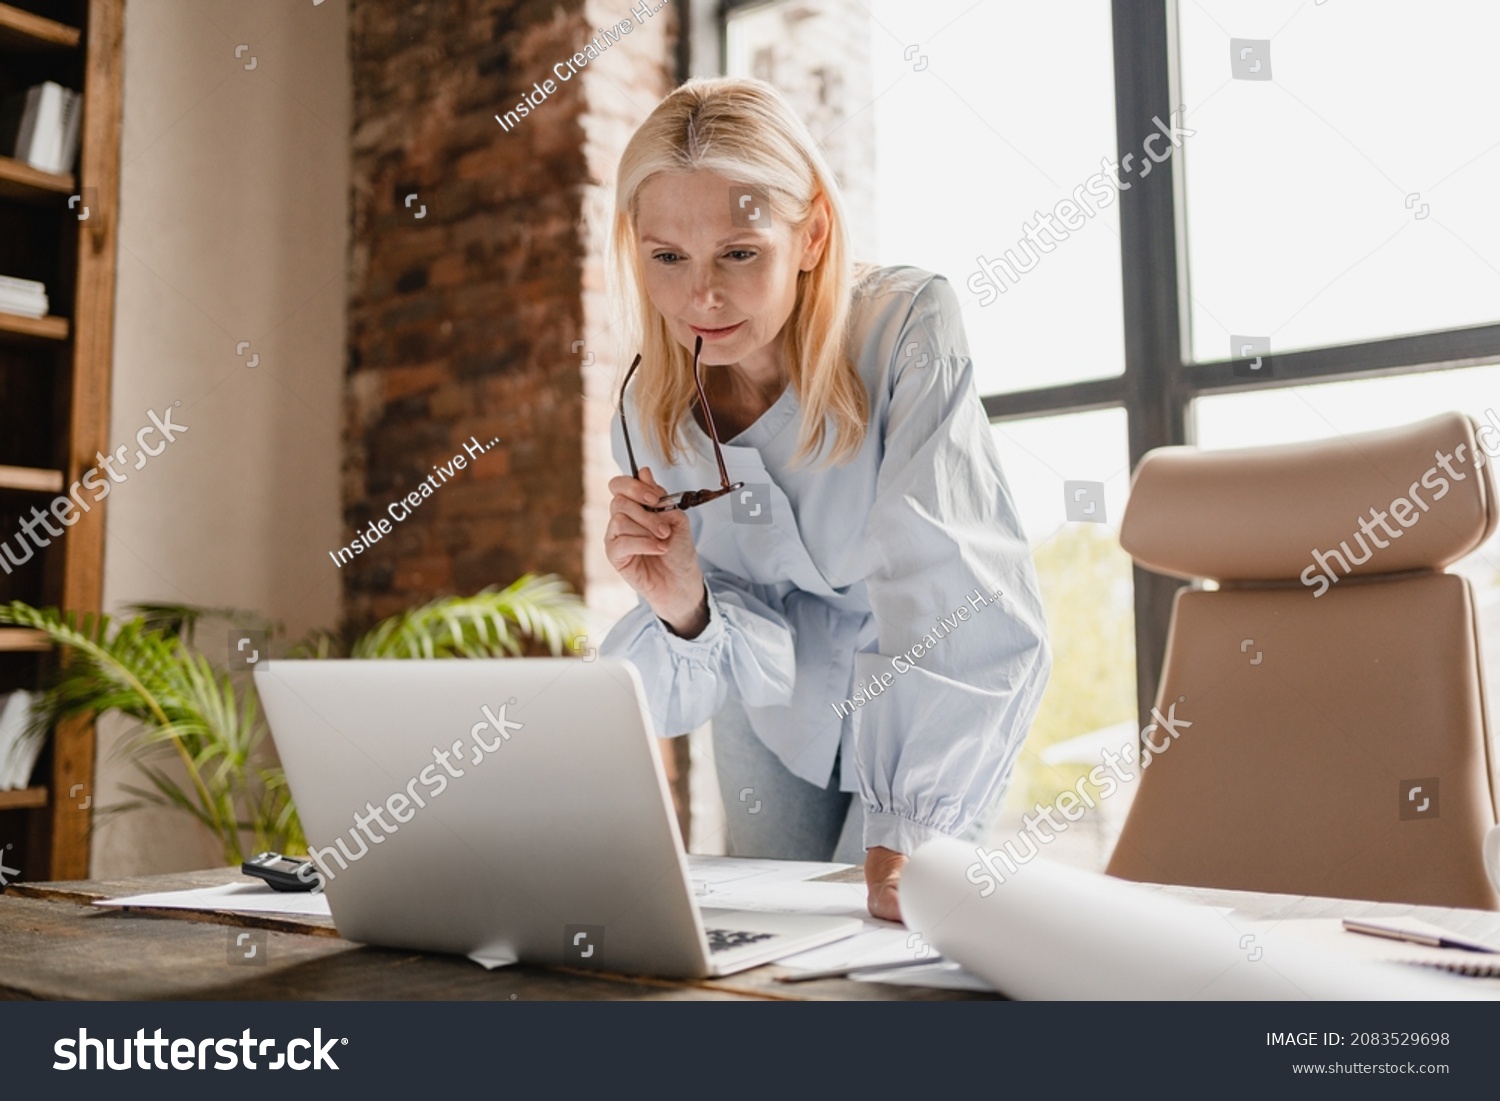 Concentrated caucasian middle-aged mature businesswoman ceo boss typing on laptop, working at office desk with documents, searching surfing web online #2083529698